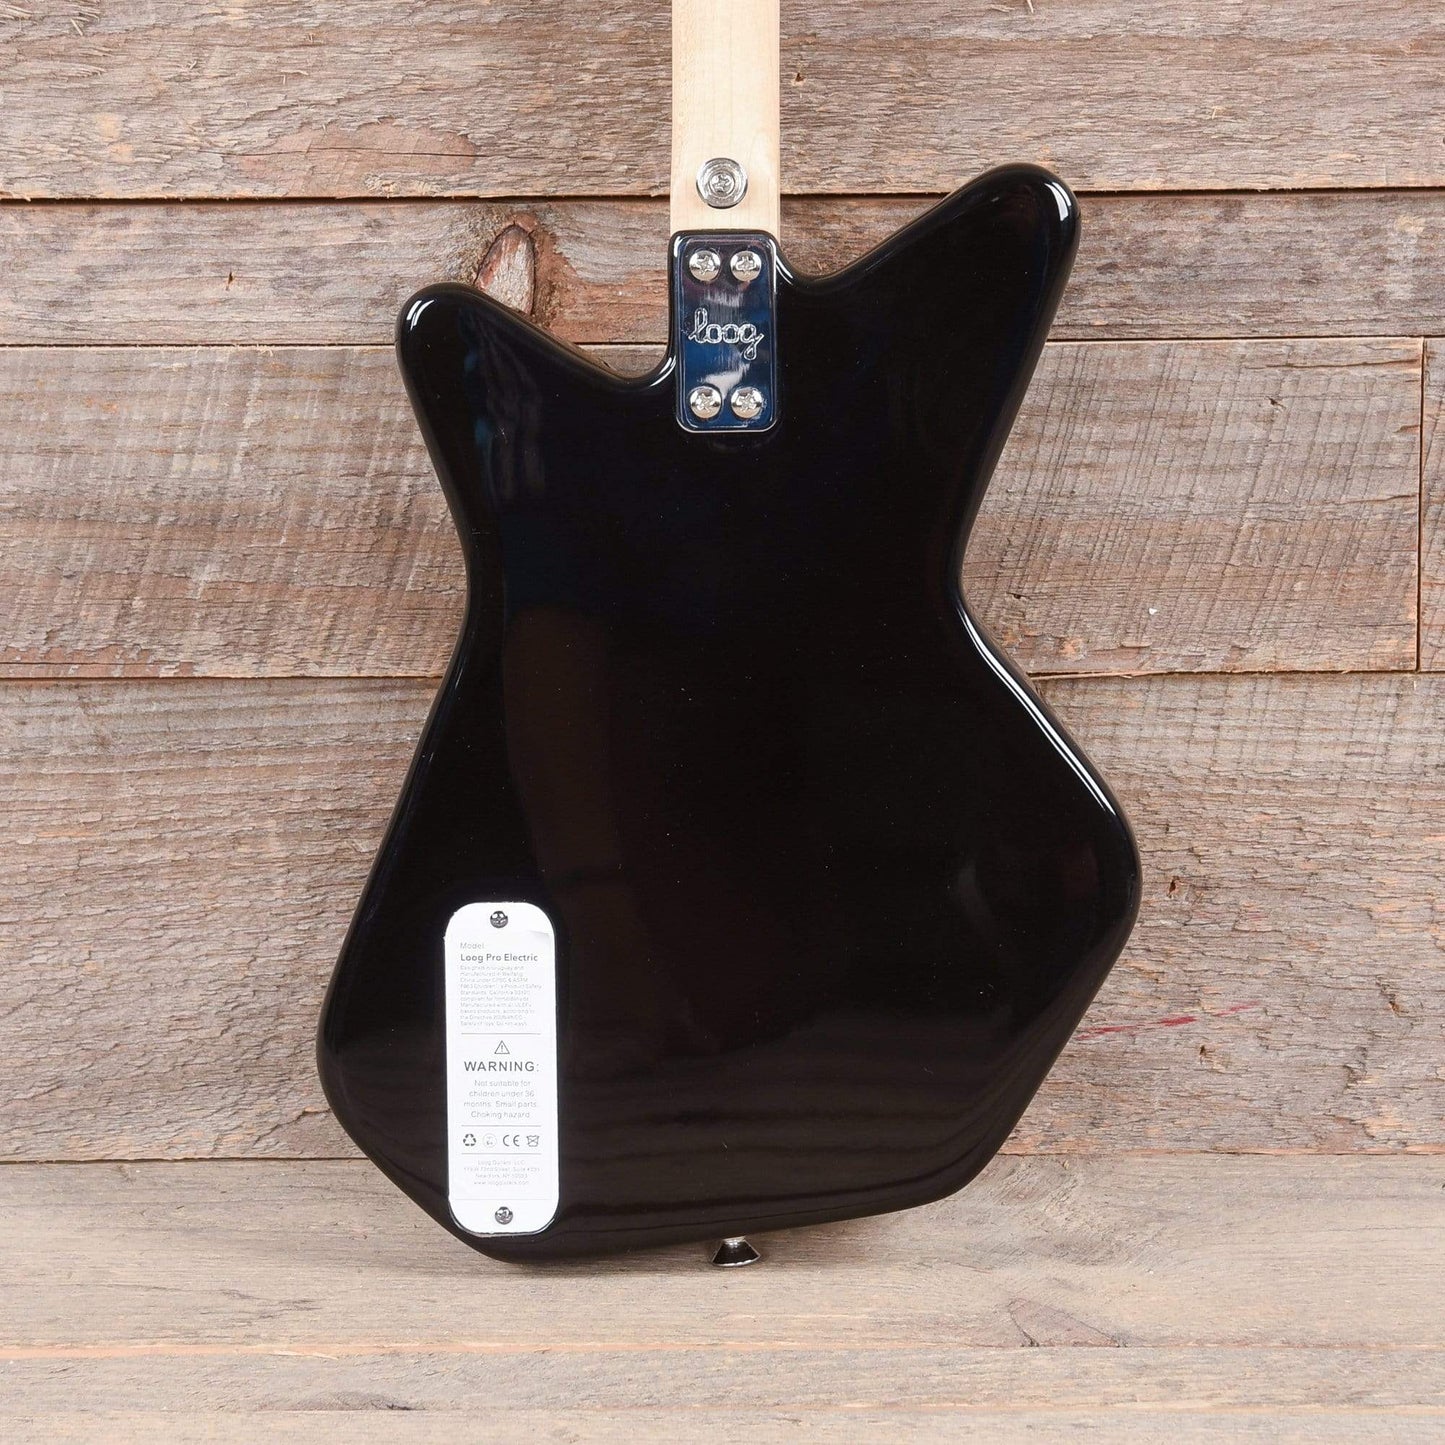 Loog Pro Electric Guitar Black Electric Guitars / Solid Body